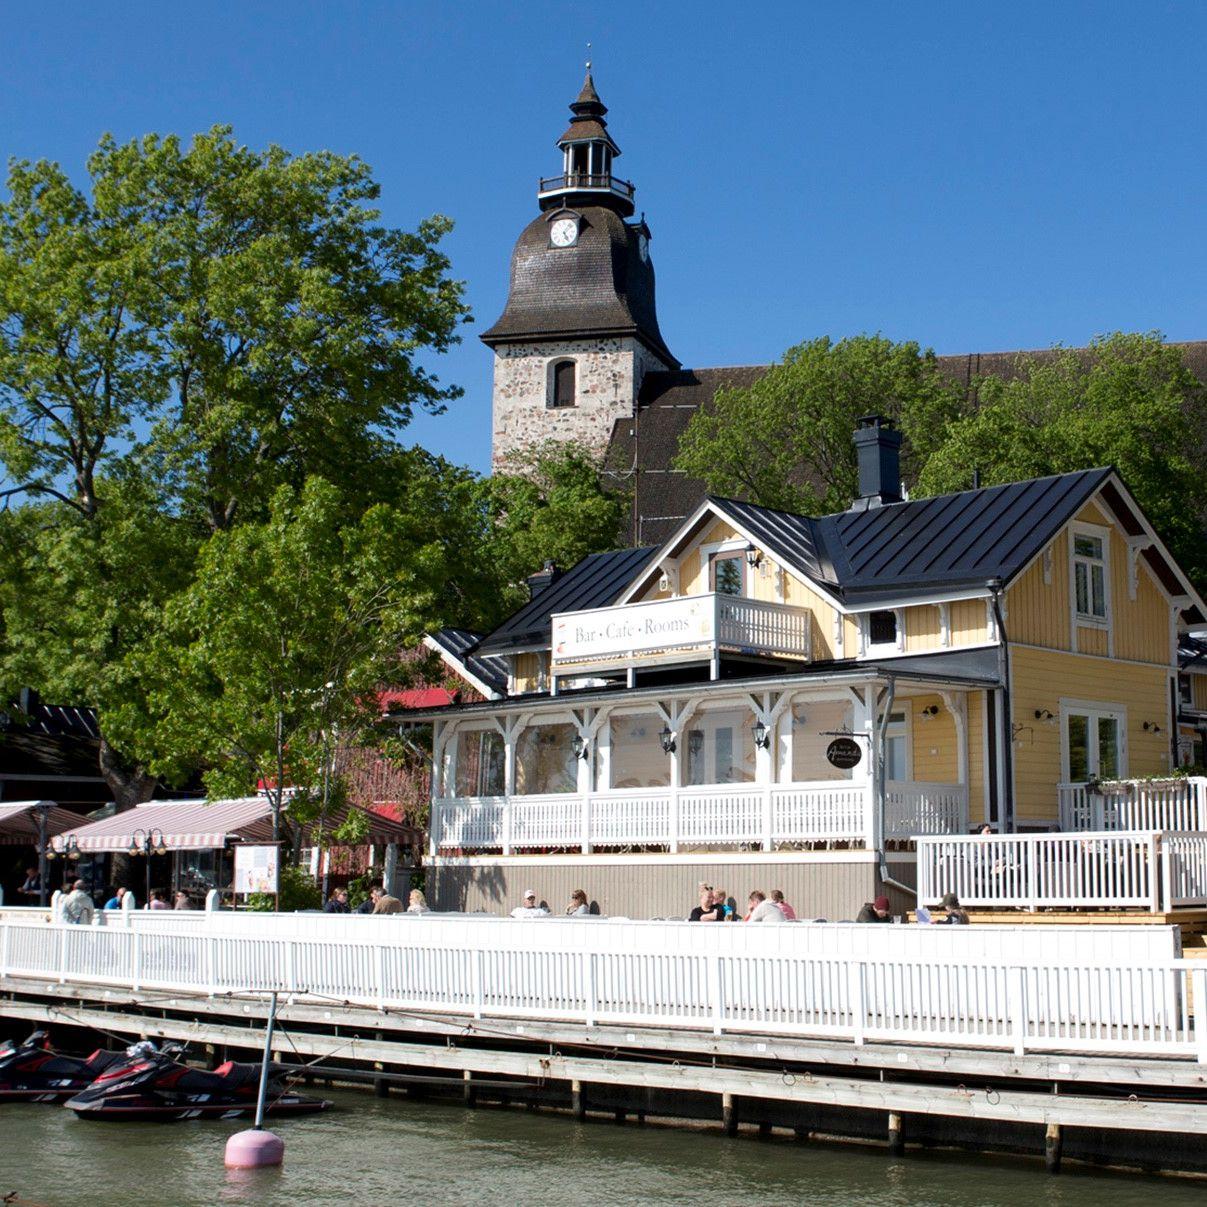 The yellow wooden building of Amandis, featuring the Naantali Church in the background.